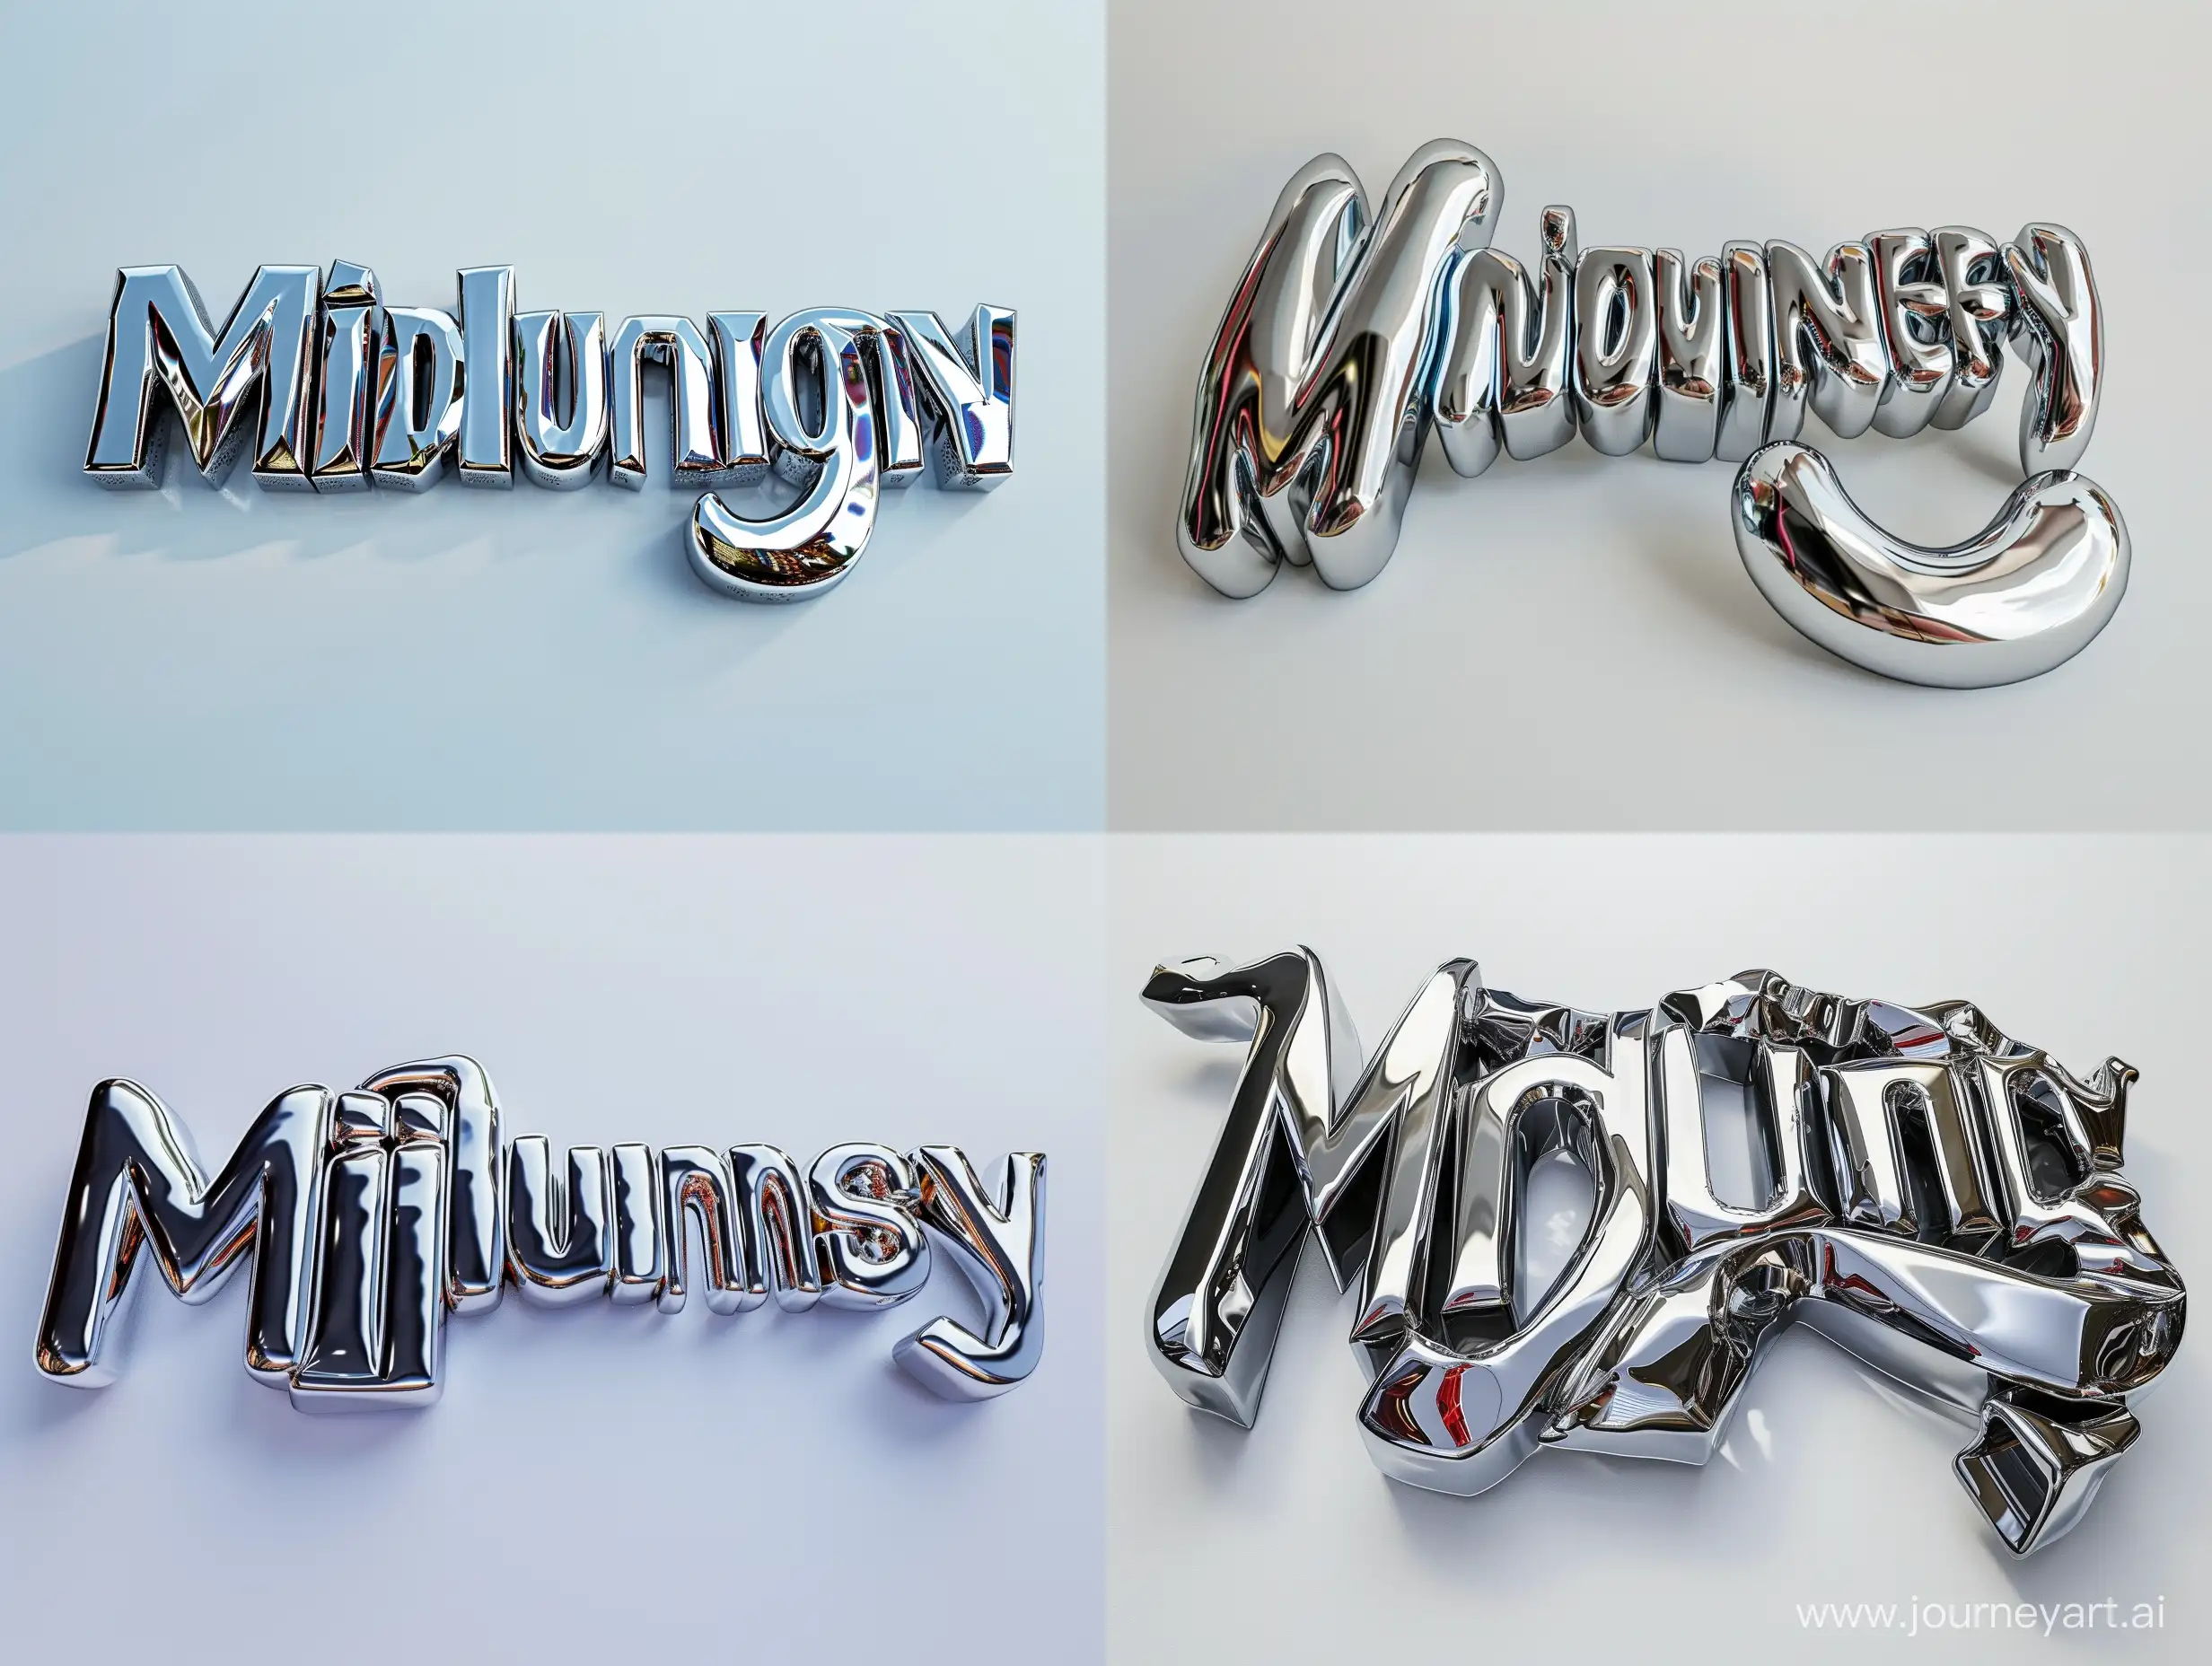 detail photo: word "Midjourney" with highly reflective metallic chrome surface, sleek, blocky, sharp curved angles, cool tones, isolated on white 